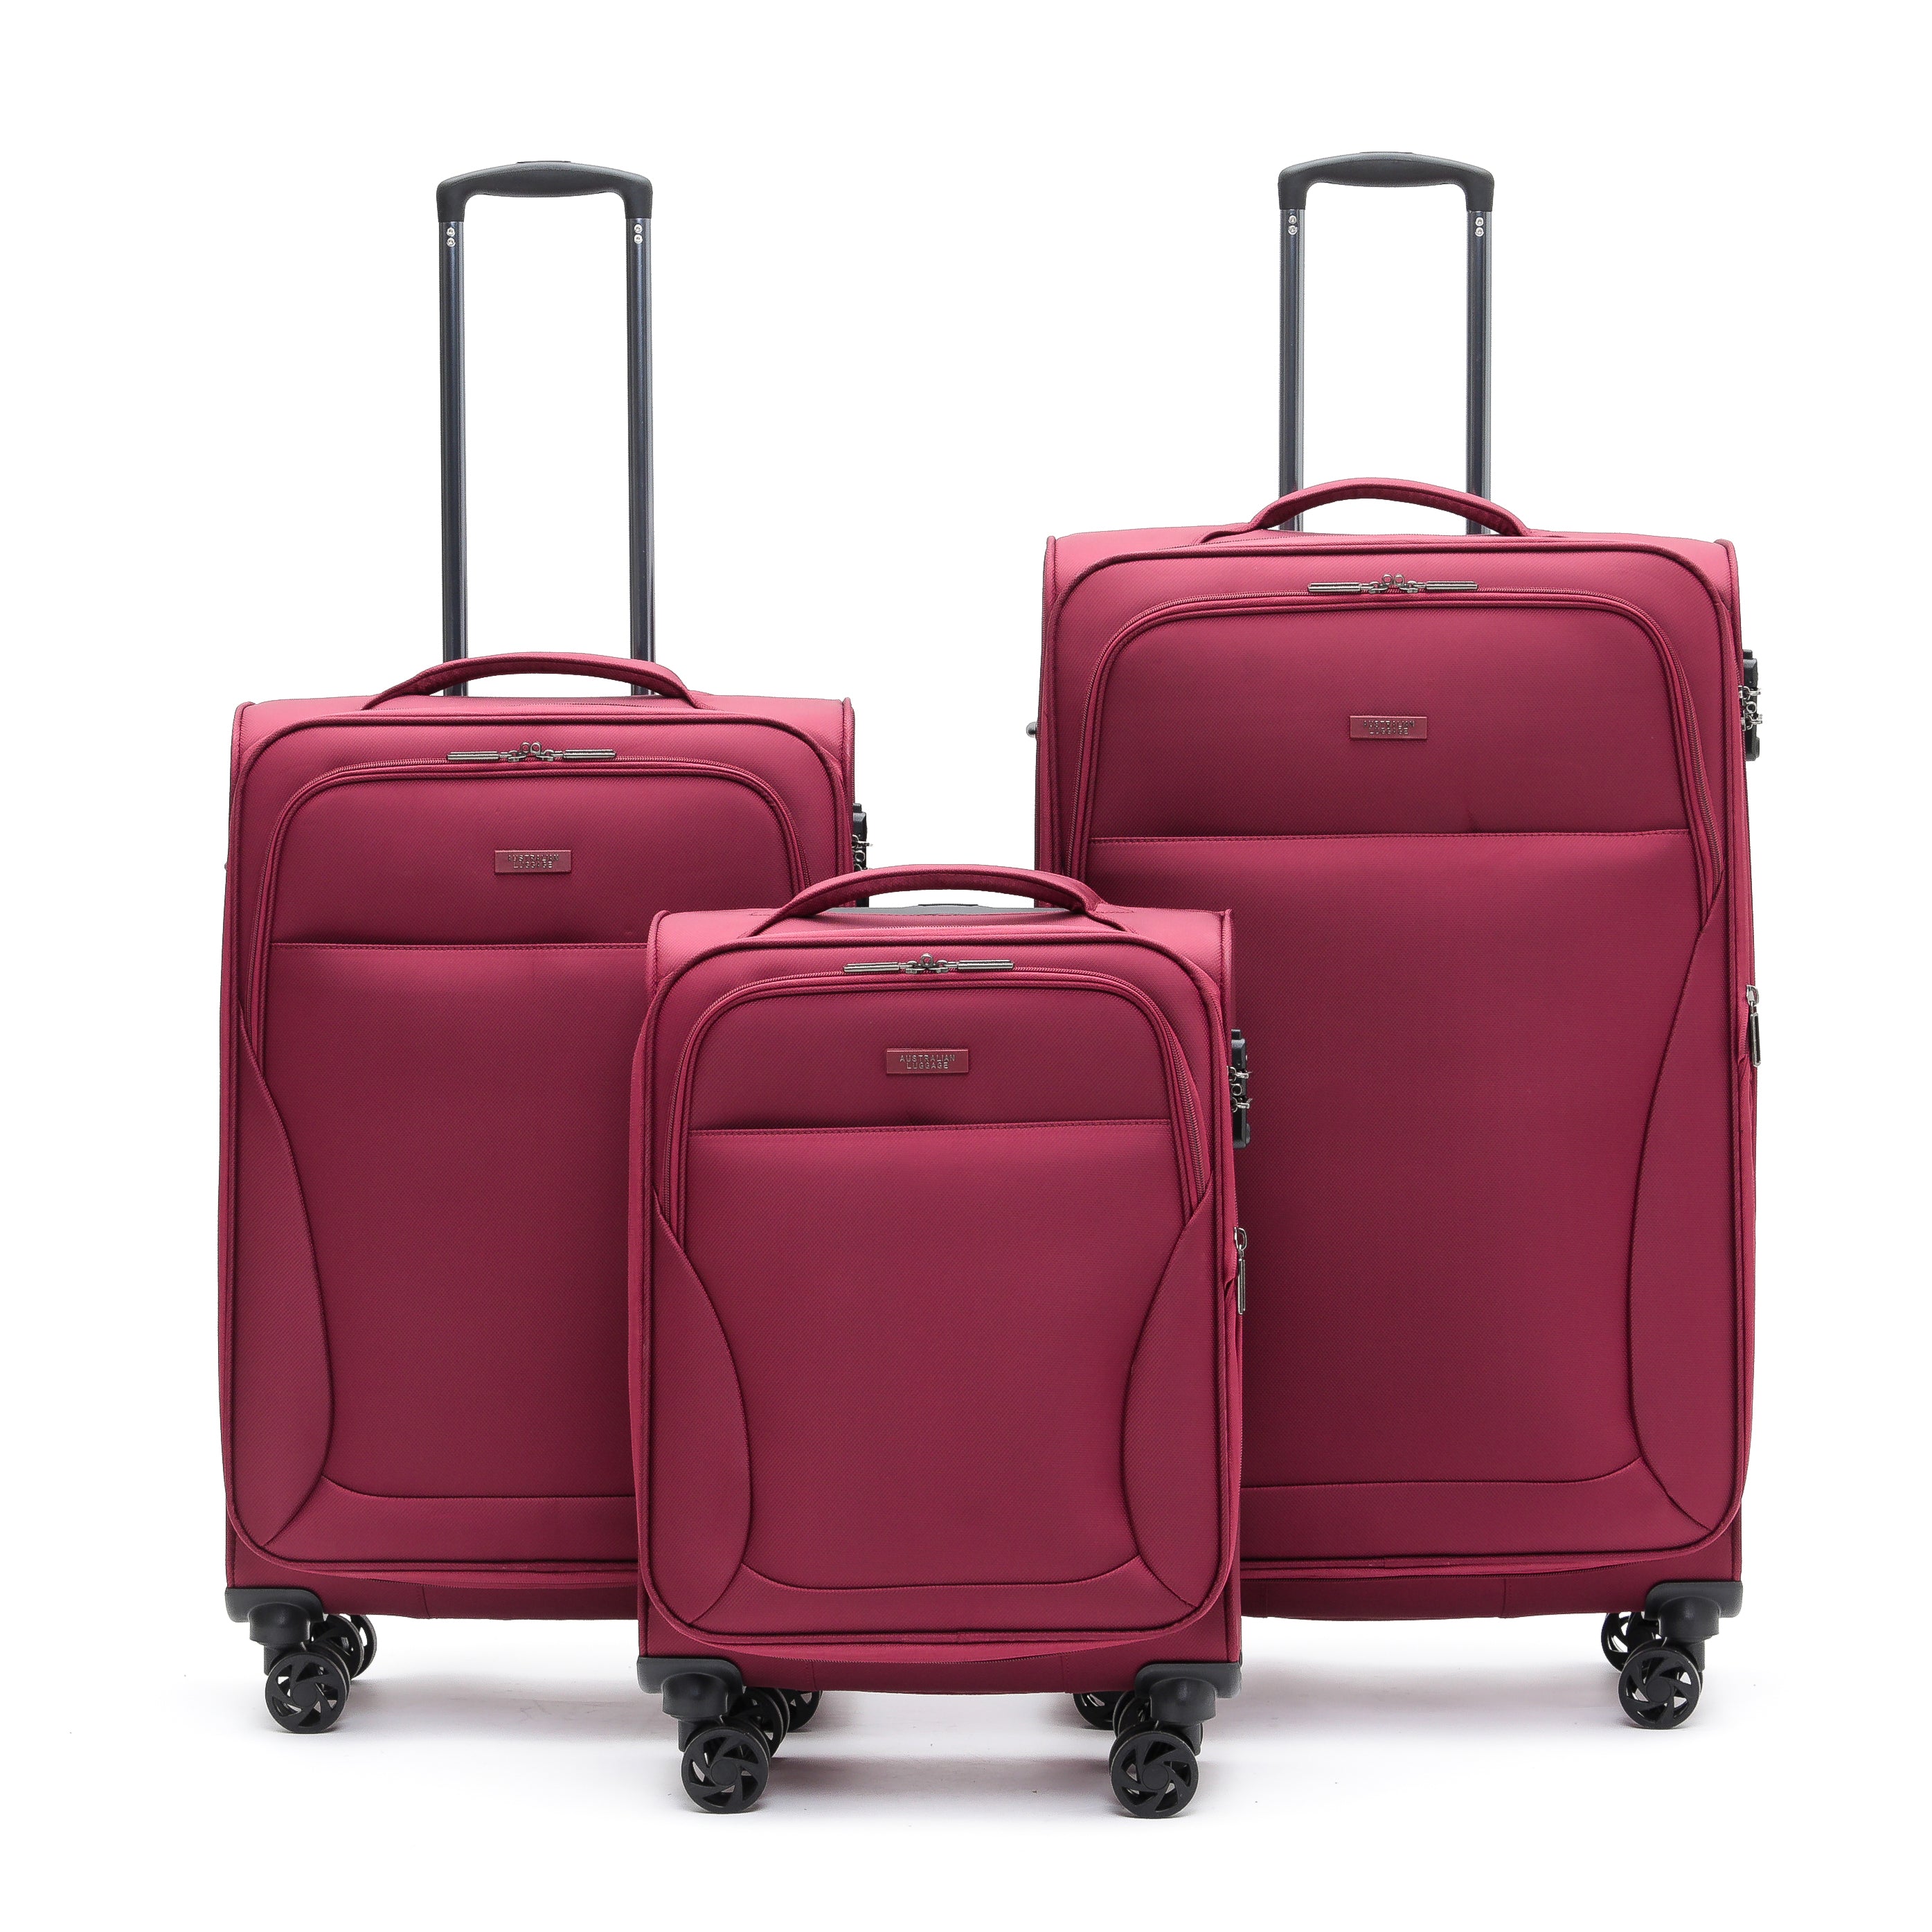 Aus Luggage - WINGS Set of 3 Suitcases - Wine-2